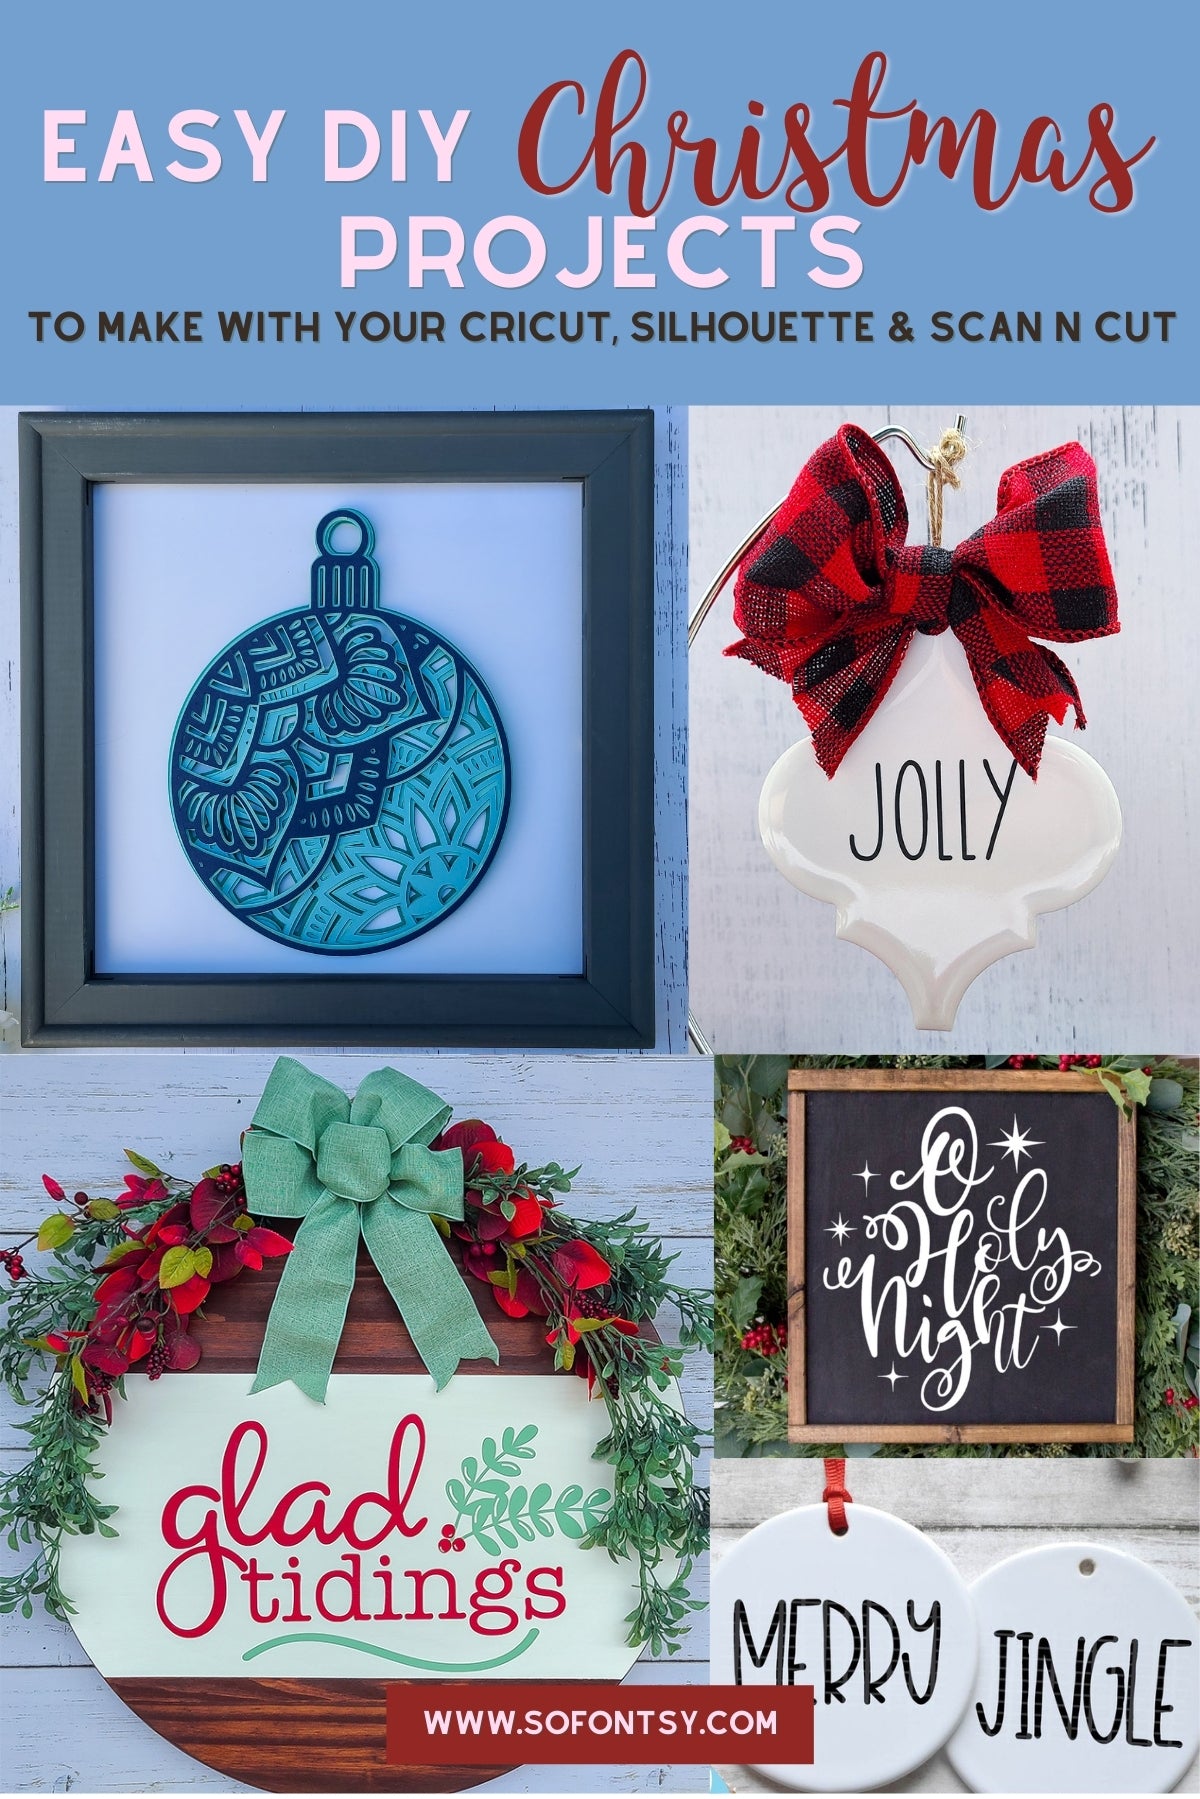 DIY Wood Ornaments with Cricut Maker and Screen Printing